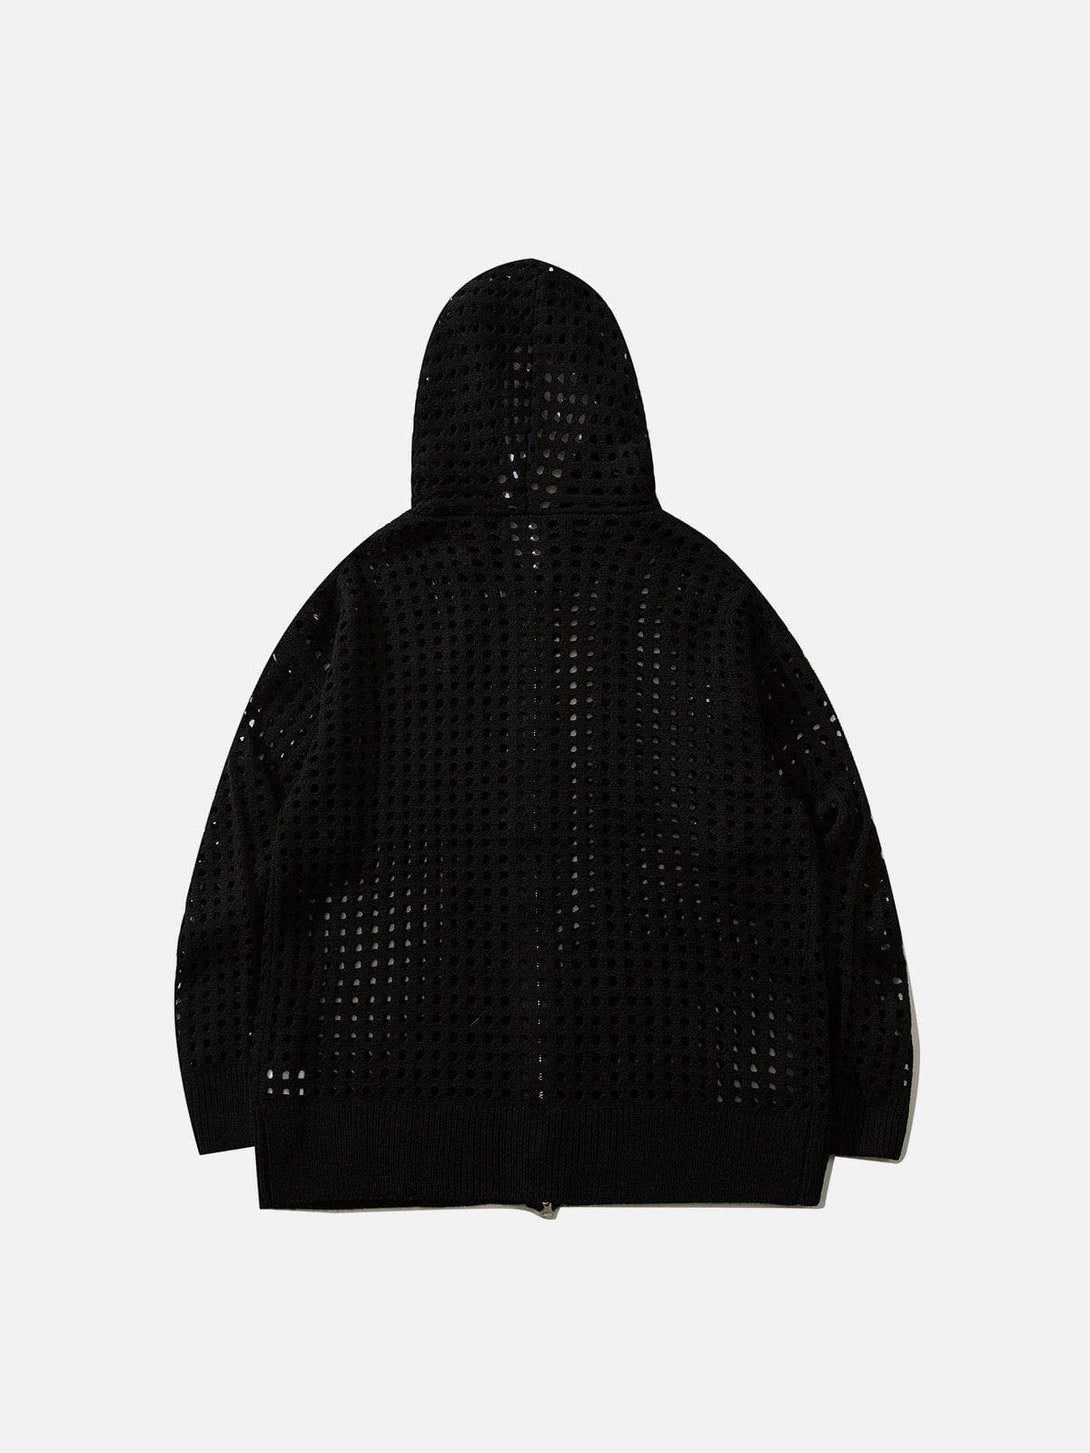 Levefly - Cutout Double Zip-up Pulls Hoodie - Streetwear Fashion - levefly.com